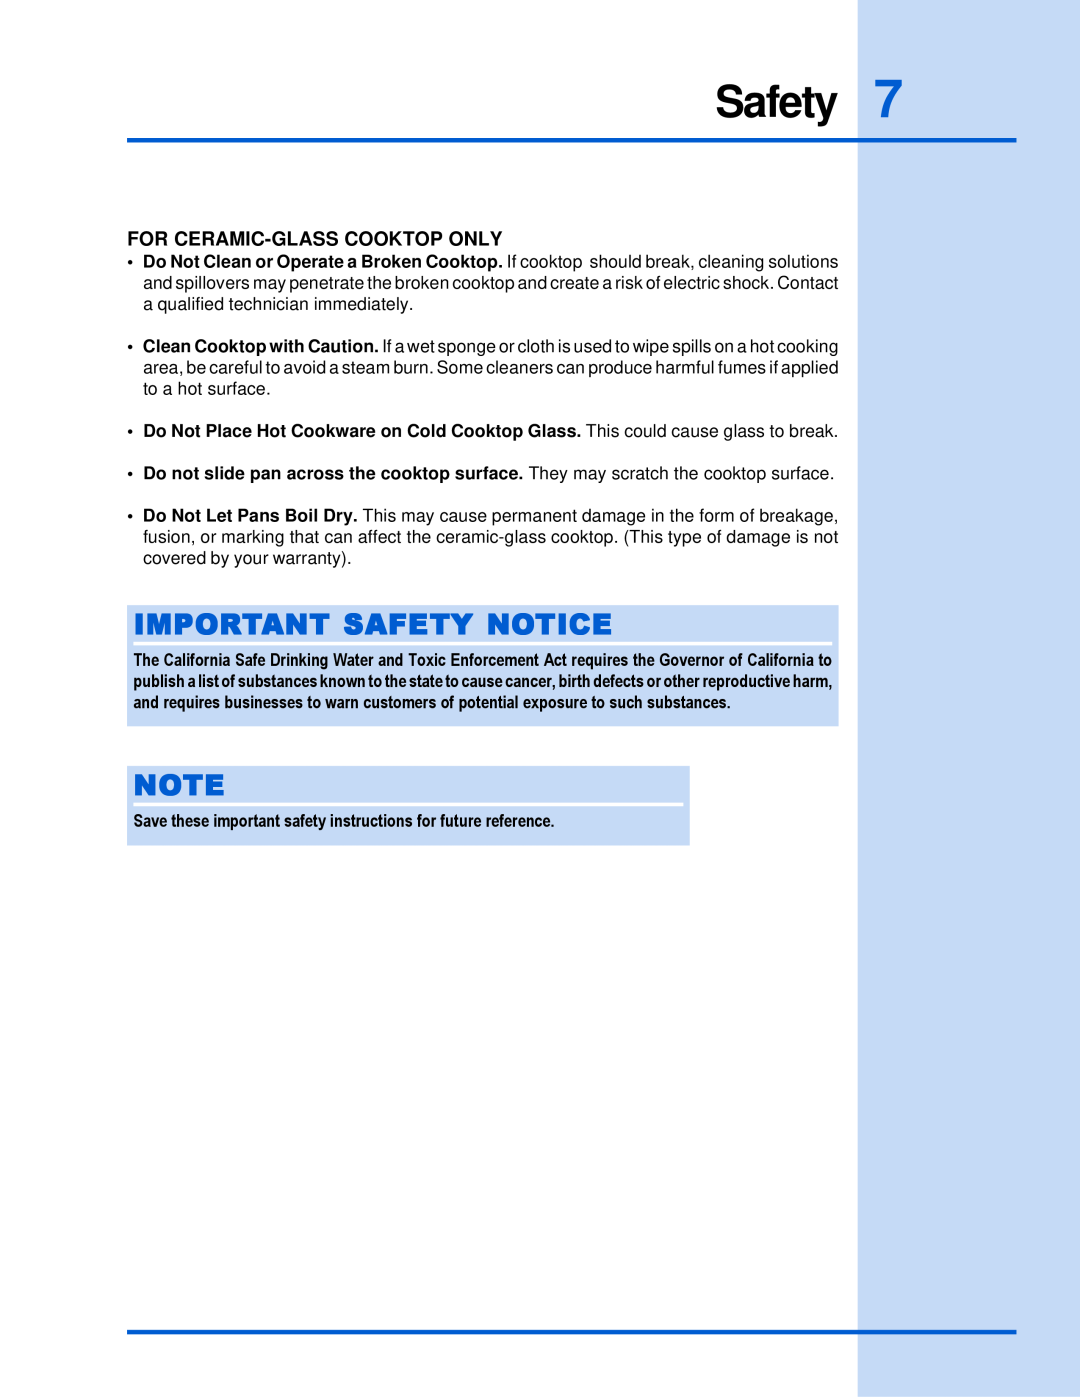 Electrolux 318 203 603 (0709) manual Important Safety Notice, For Ceramic-Glass Cooktop Only 